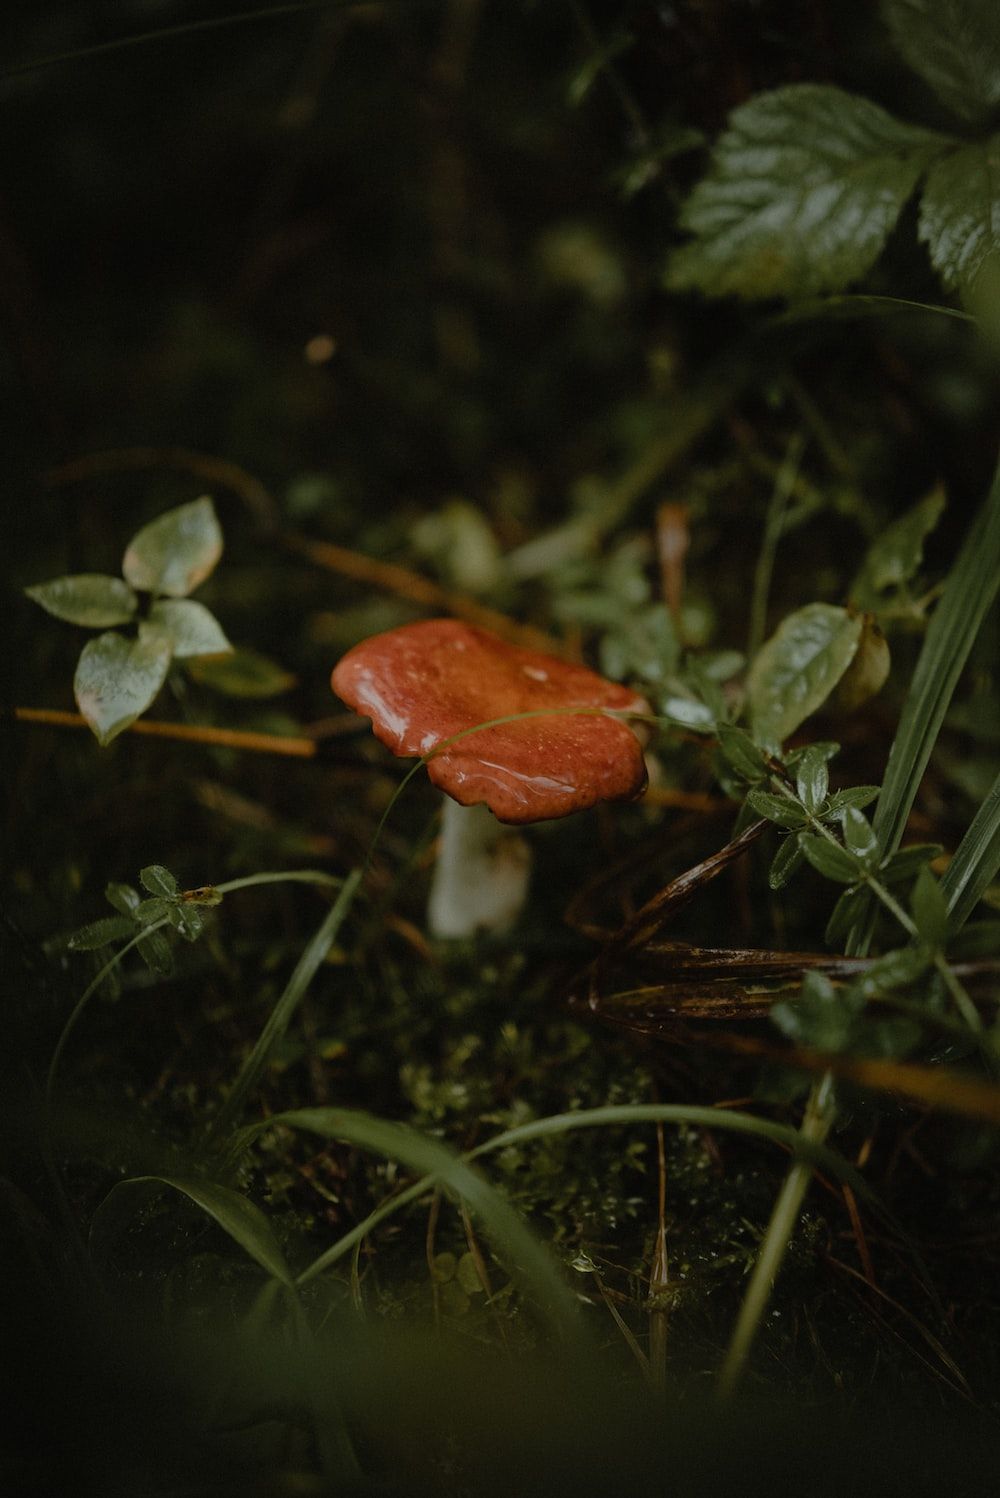 A small red mushroom sitting on the ground photo